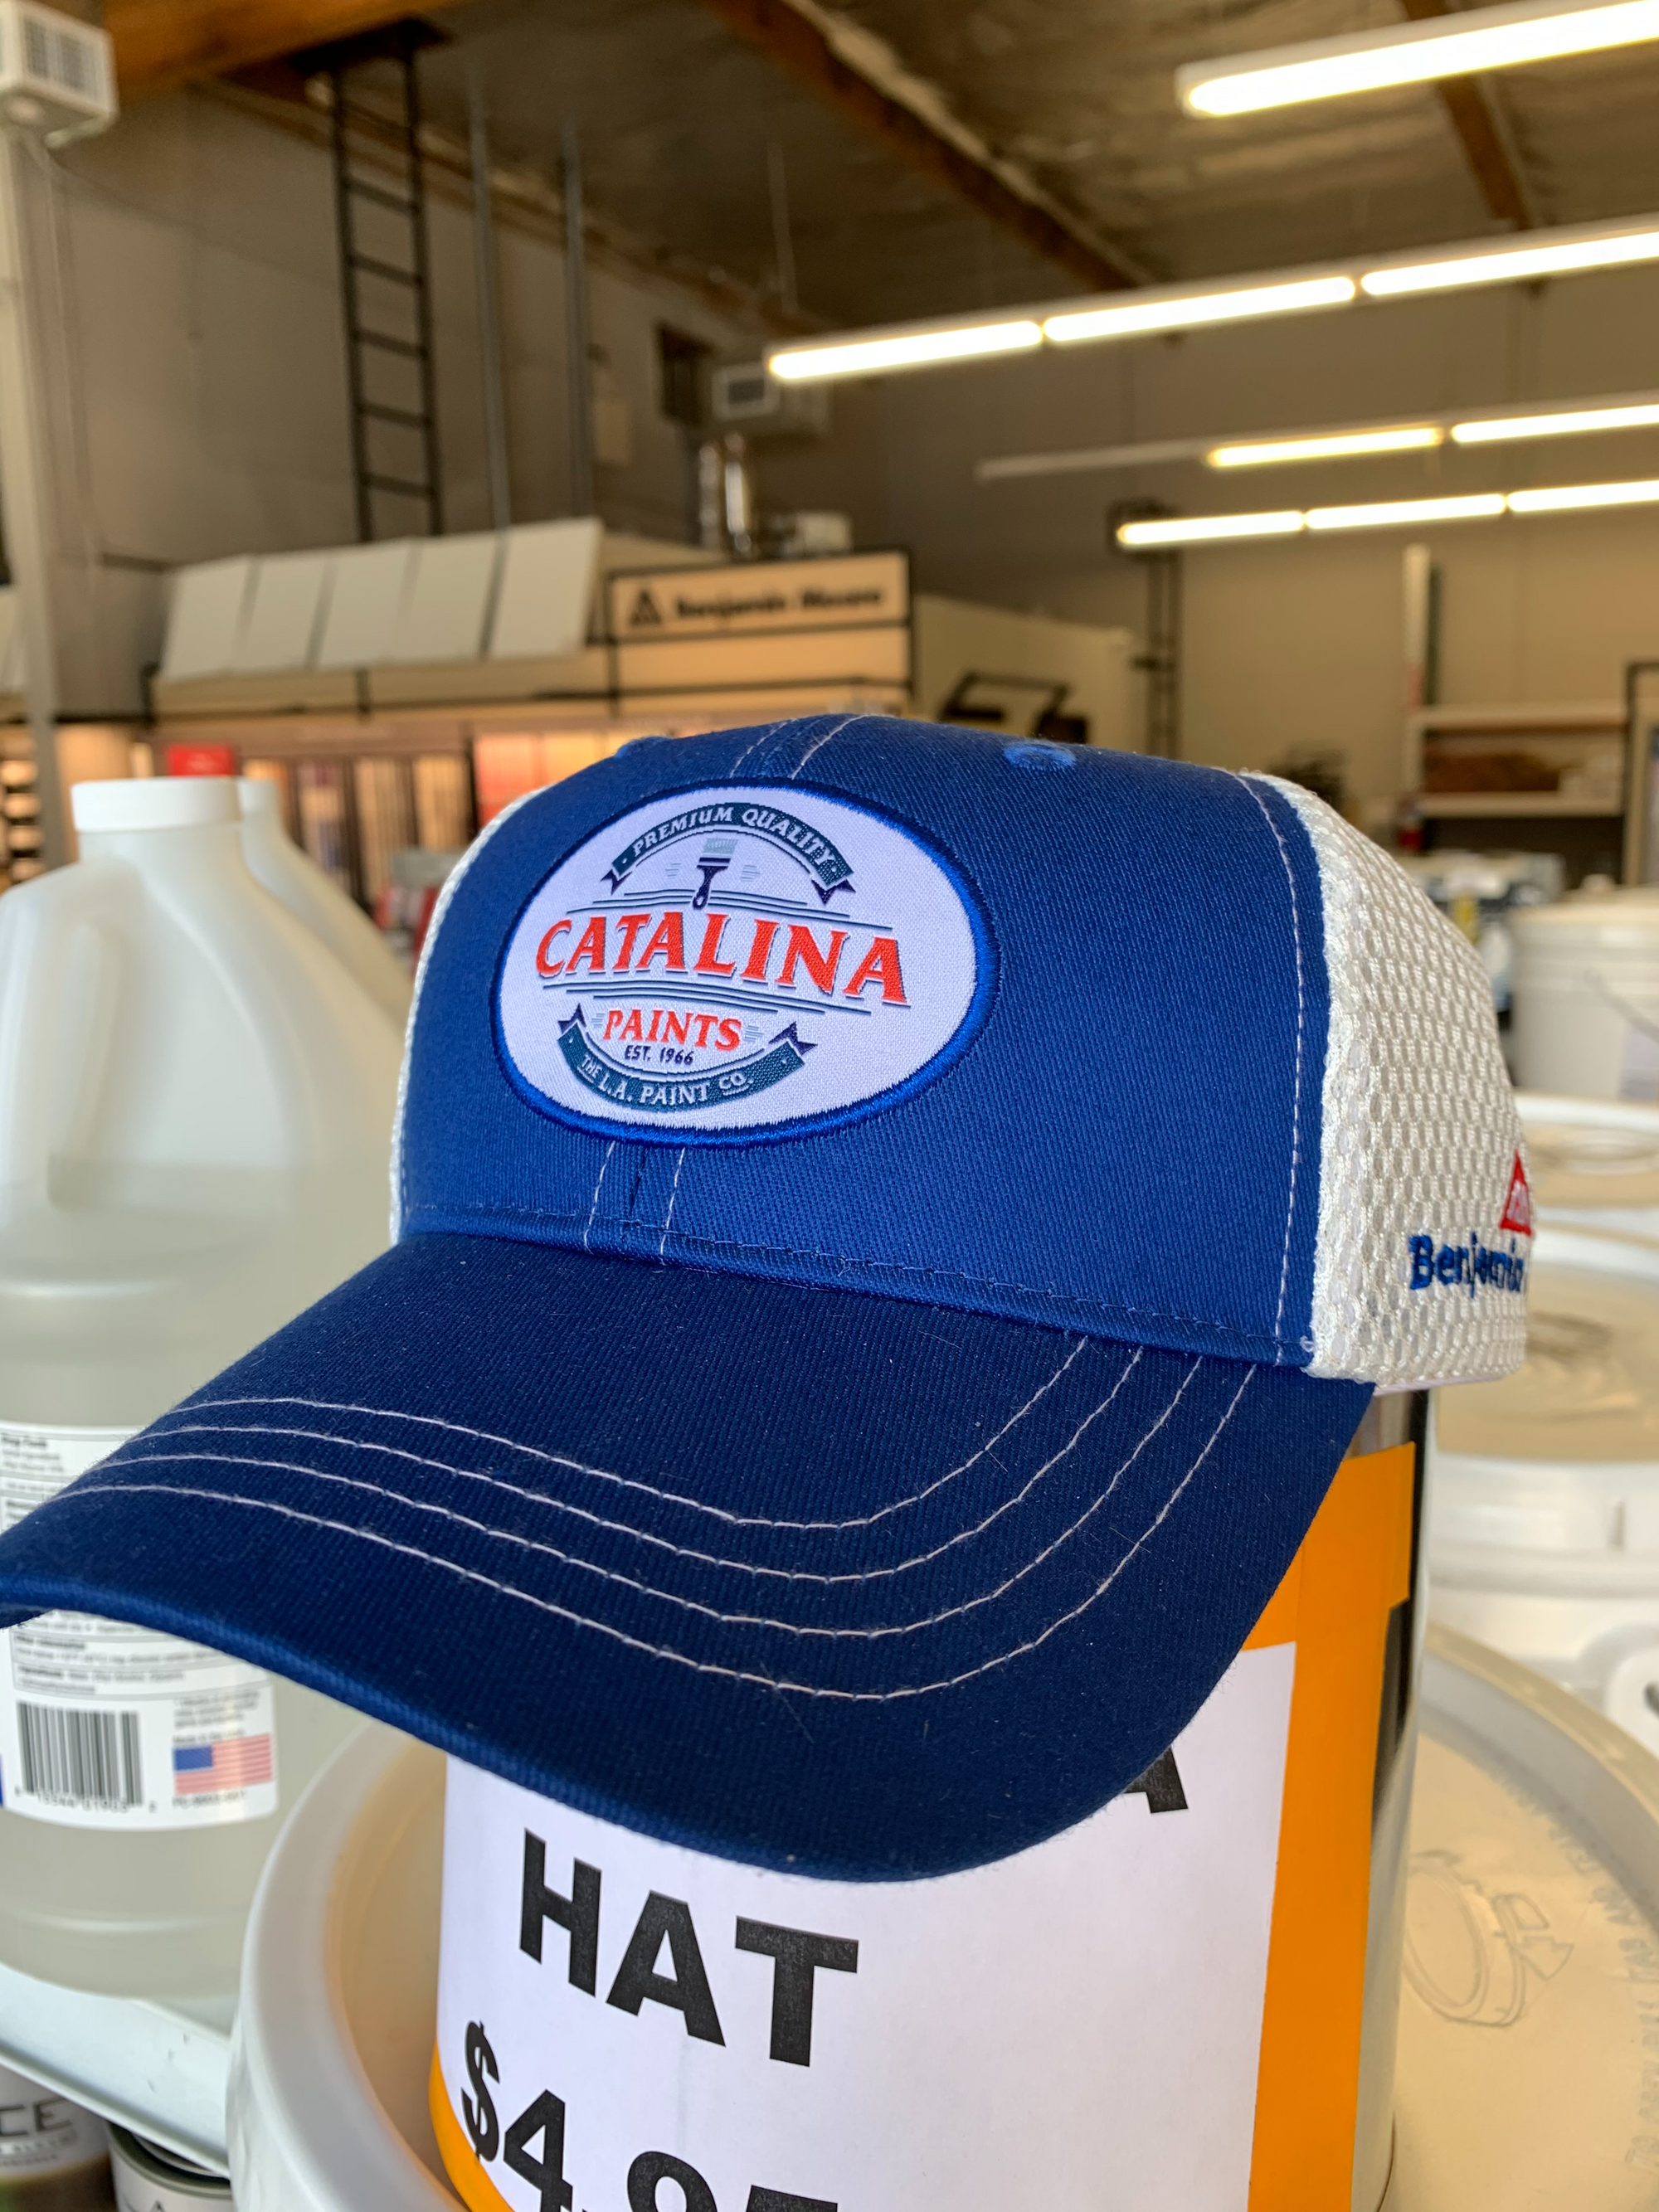 Catalina Hat, available at Catalina Paints in Los Angeles County, CA.